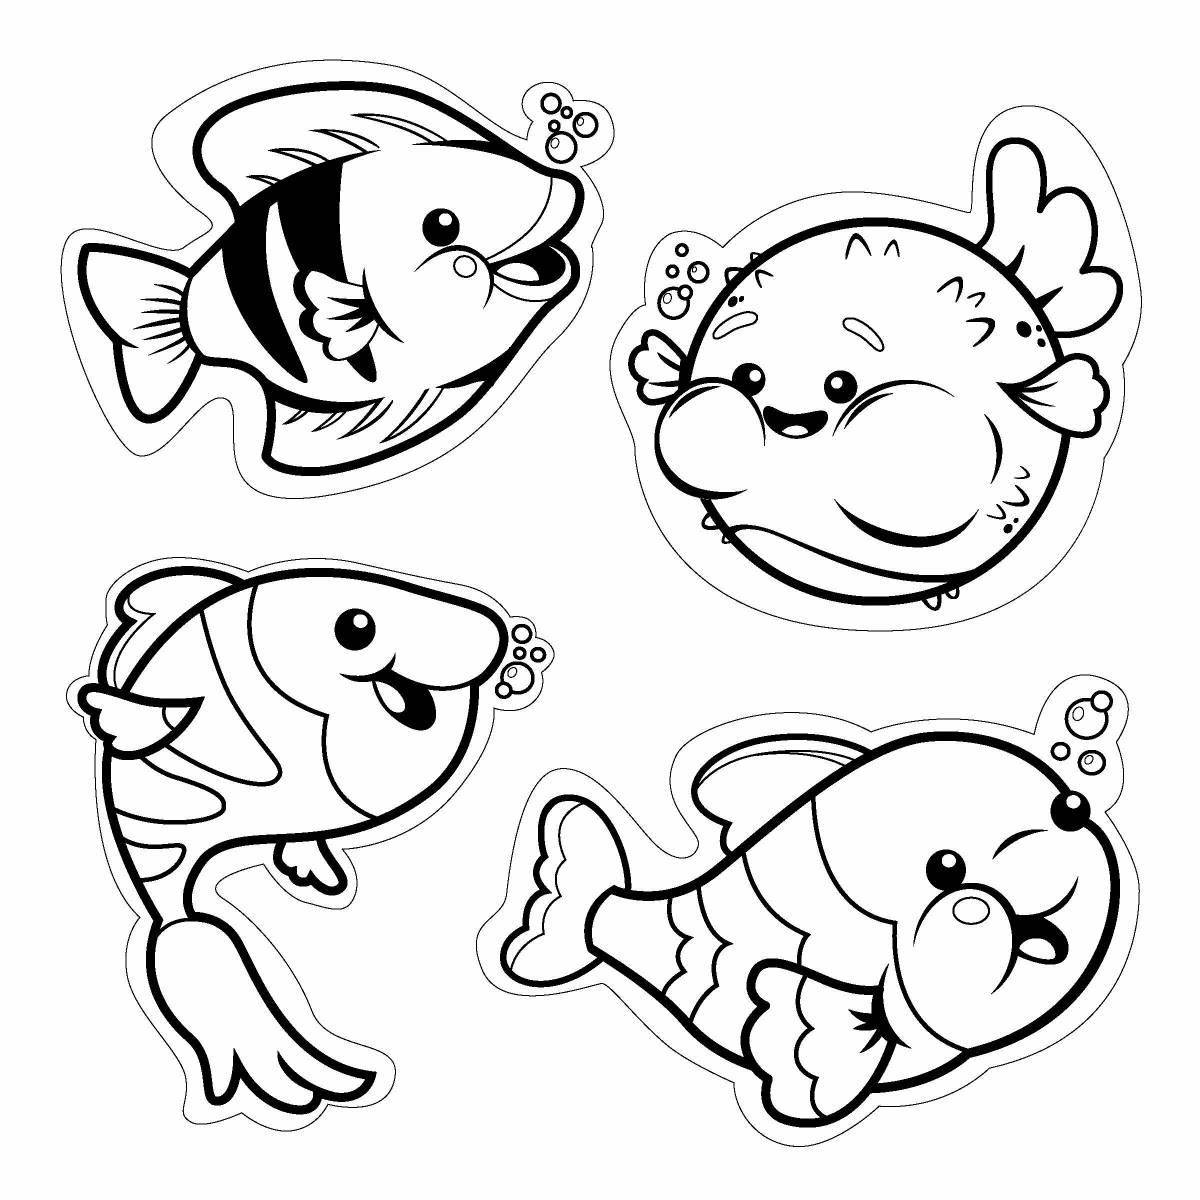 Fish pattern for kids #6